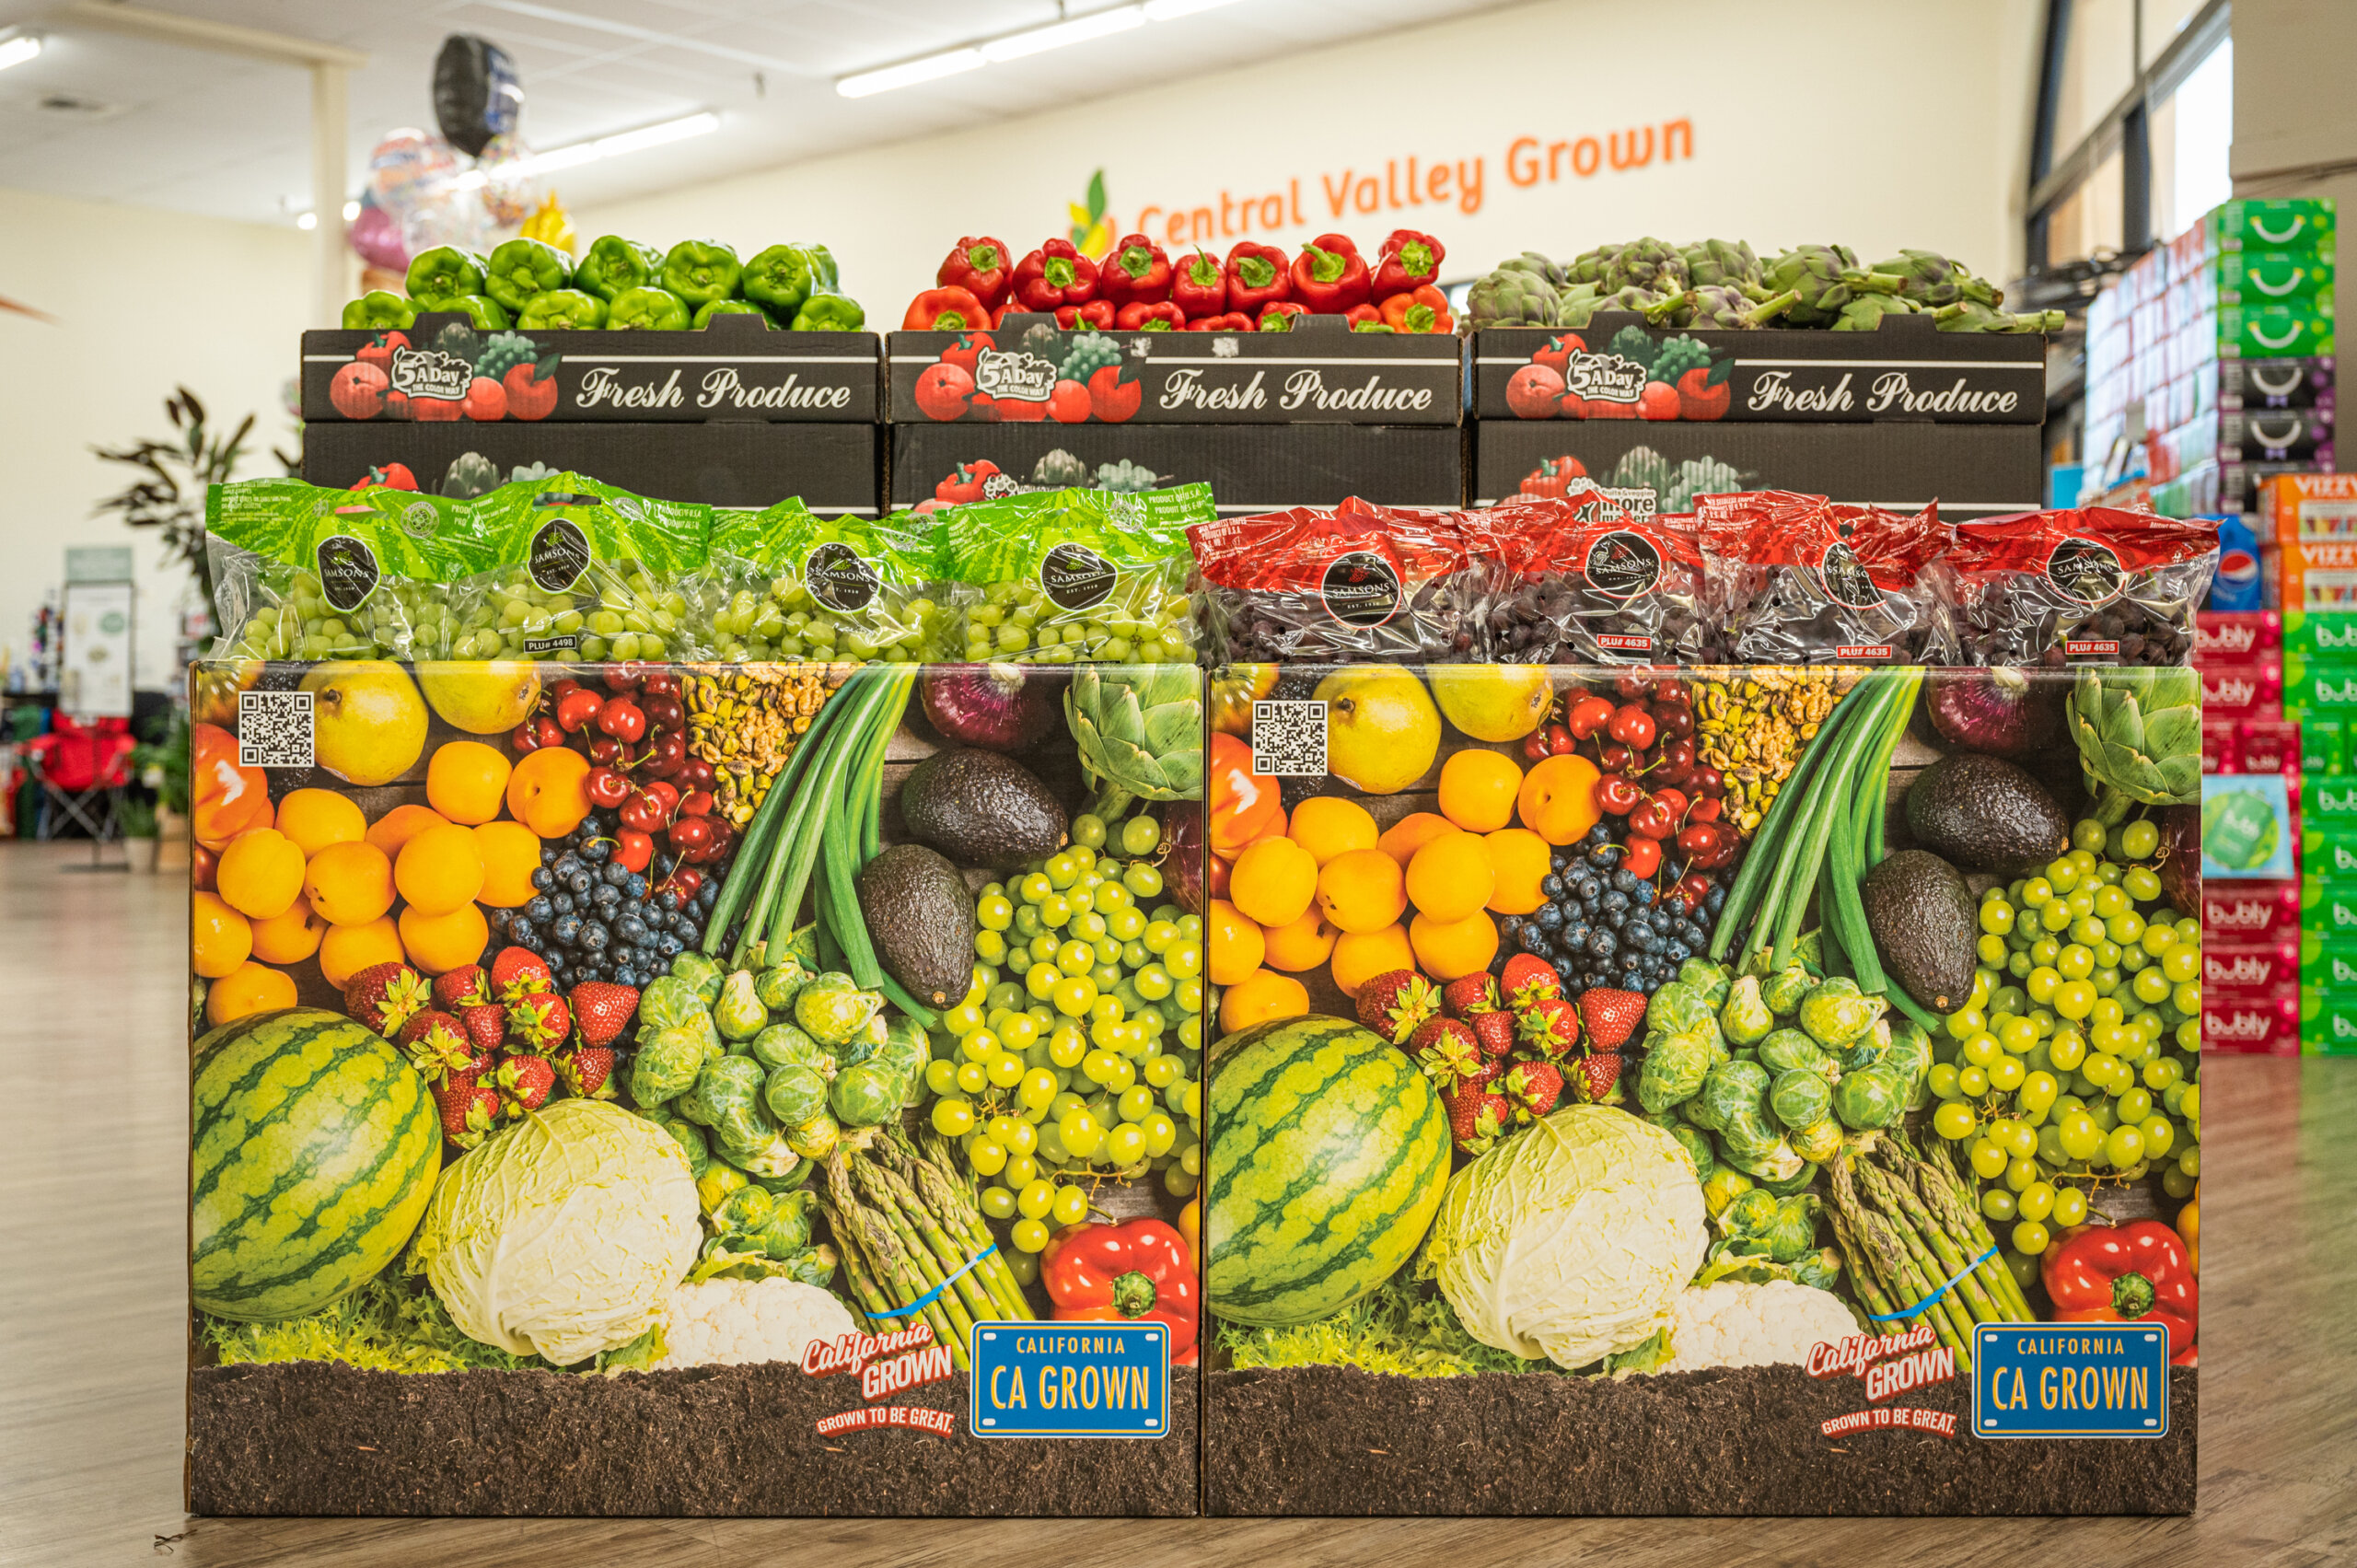 Grocery store produce bins labeled with the California GROWN logo